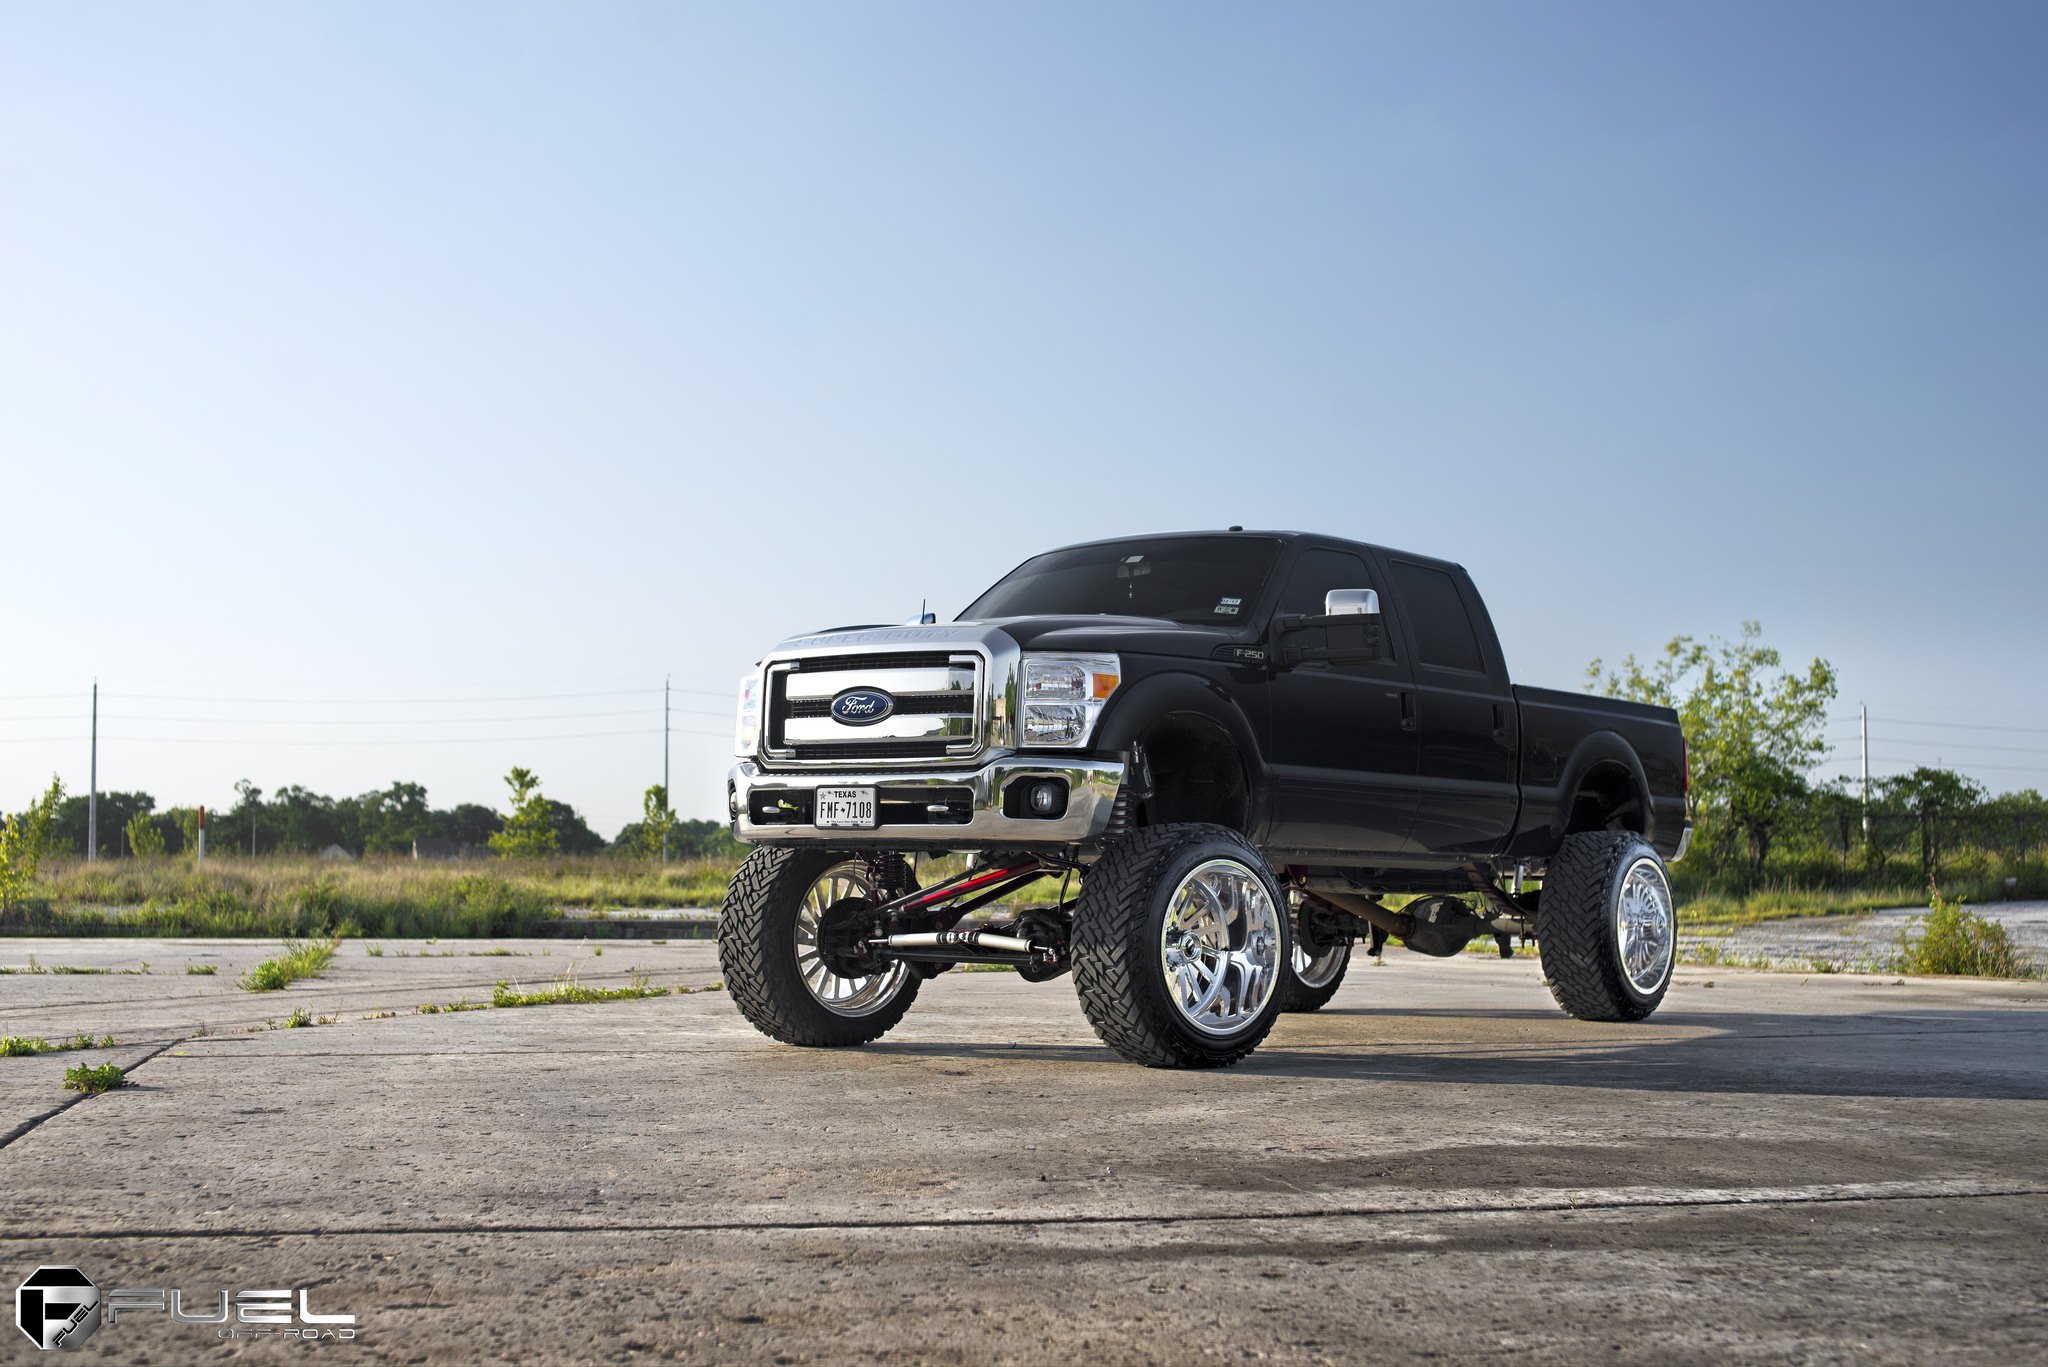 Black Ford F-250 with 12 Inch Lift Kit - Photo by Fuel Offroad